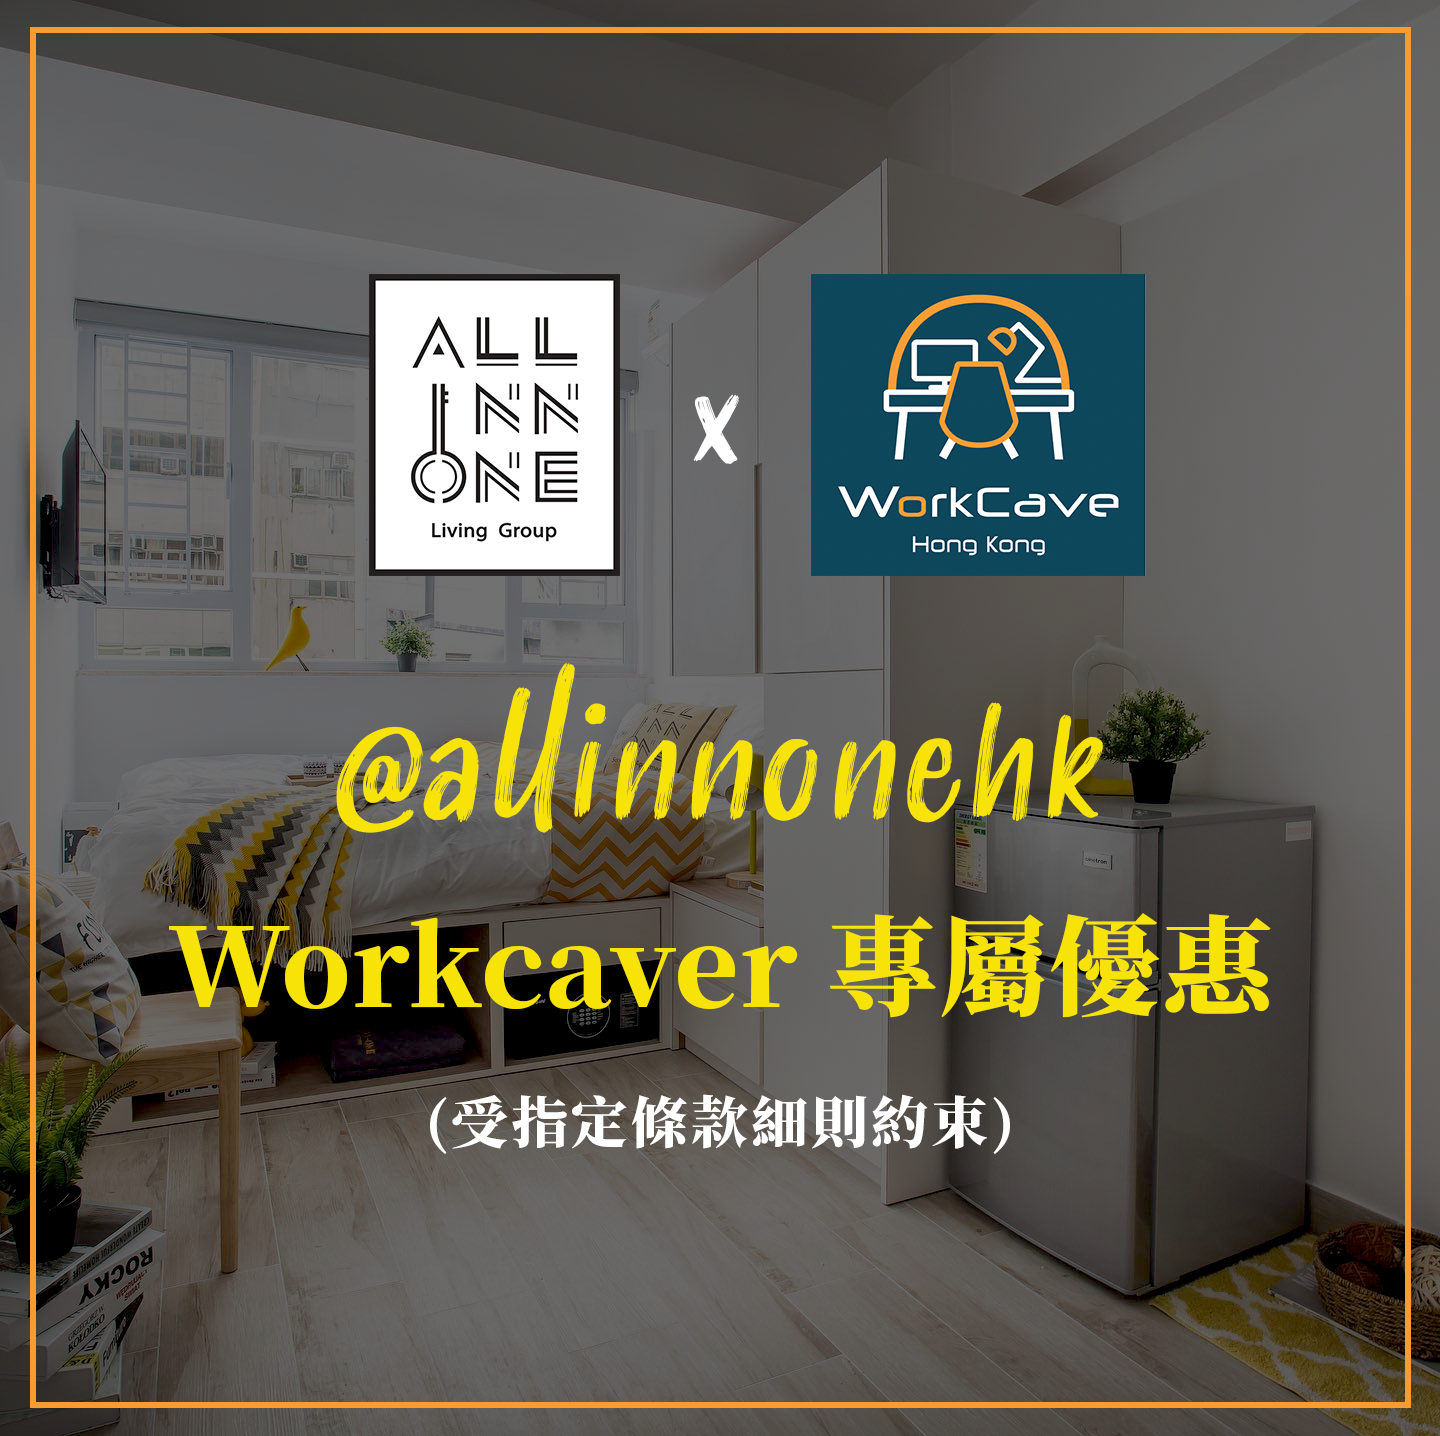 Partnership Announcement with All-Inn-One Living Group